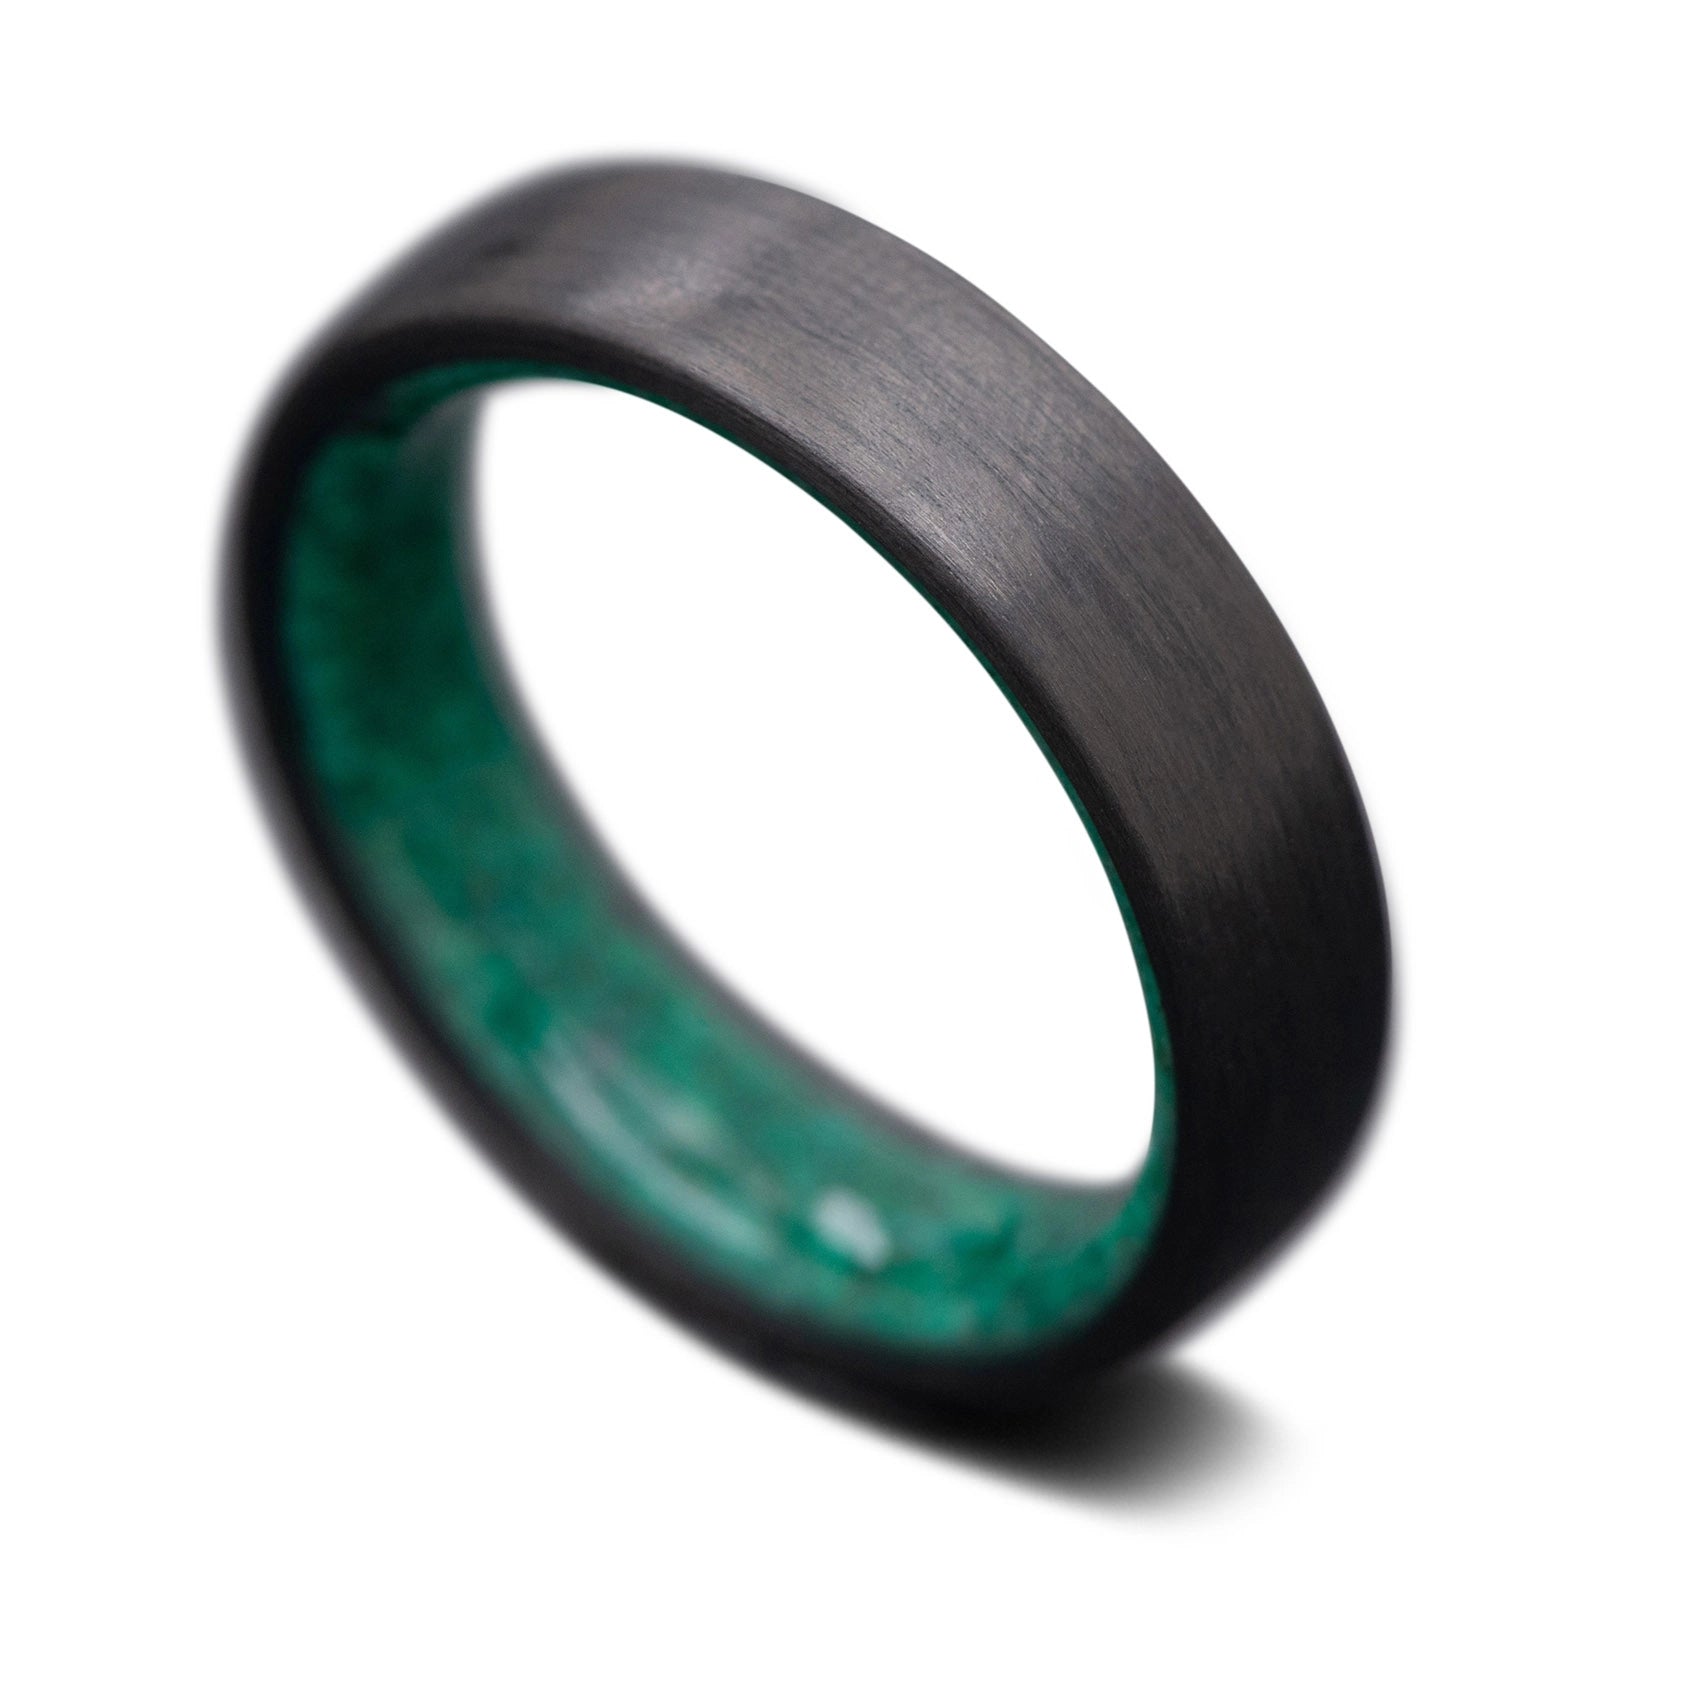 Carbon Fiber ring with Malachite inner sleeve, 5mm -THE QUANTUM